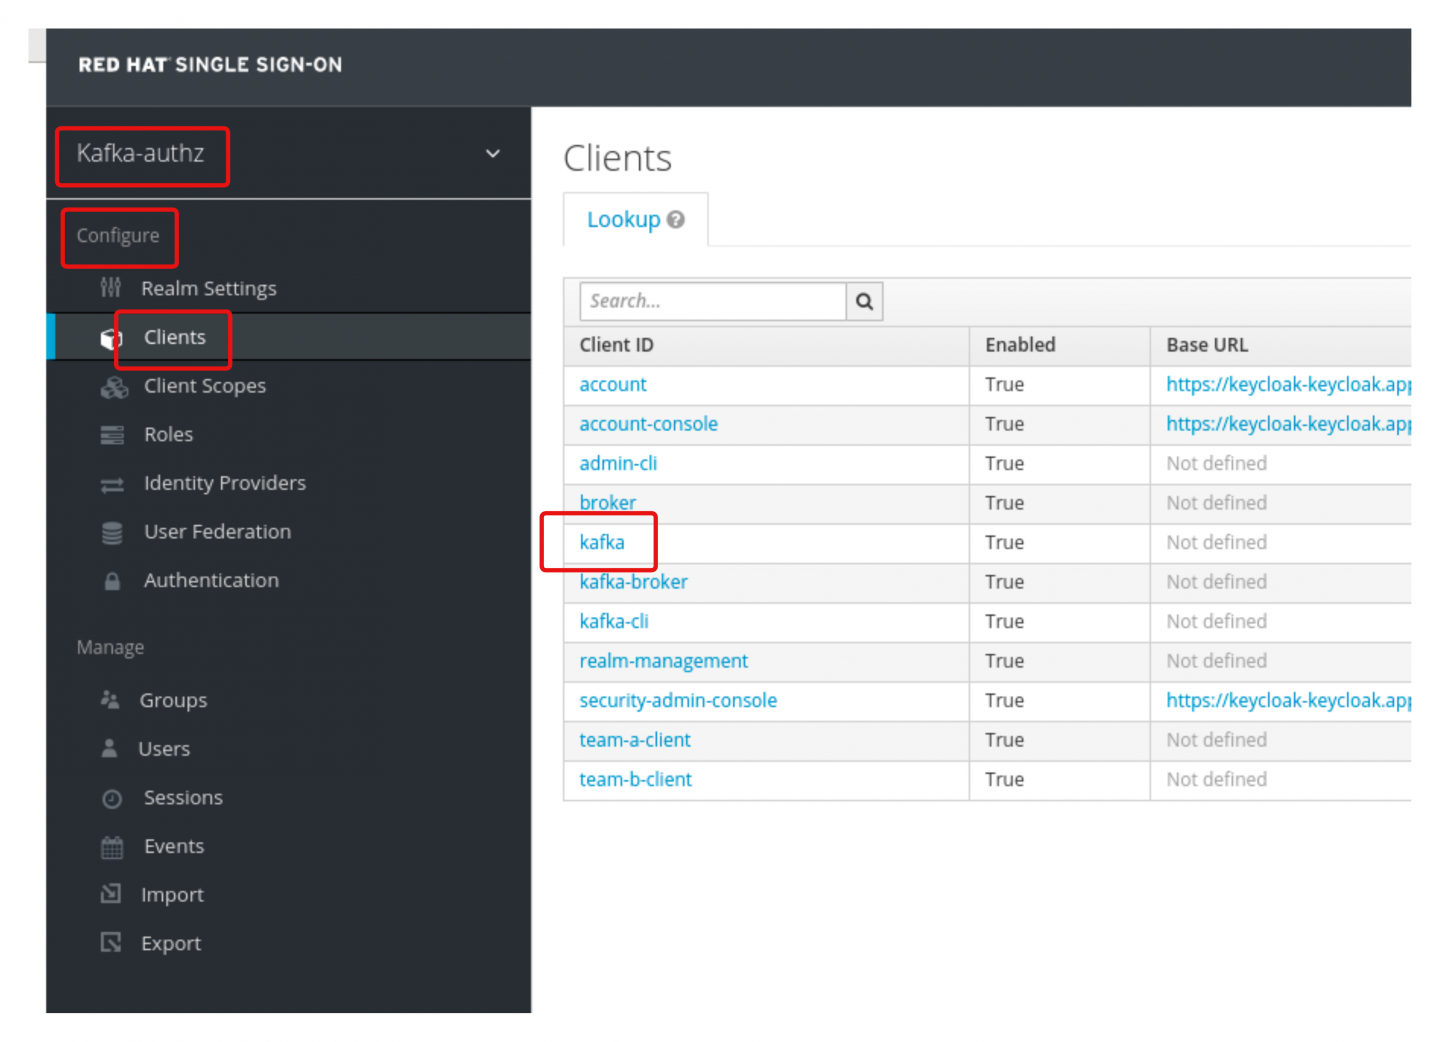 Choose the kafka client from the listing in the Red Hat's SSO console.